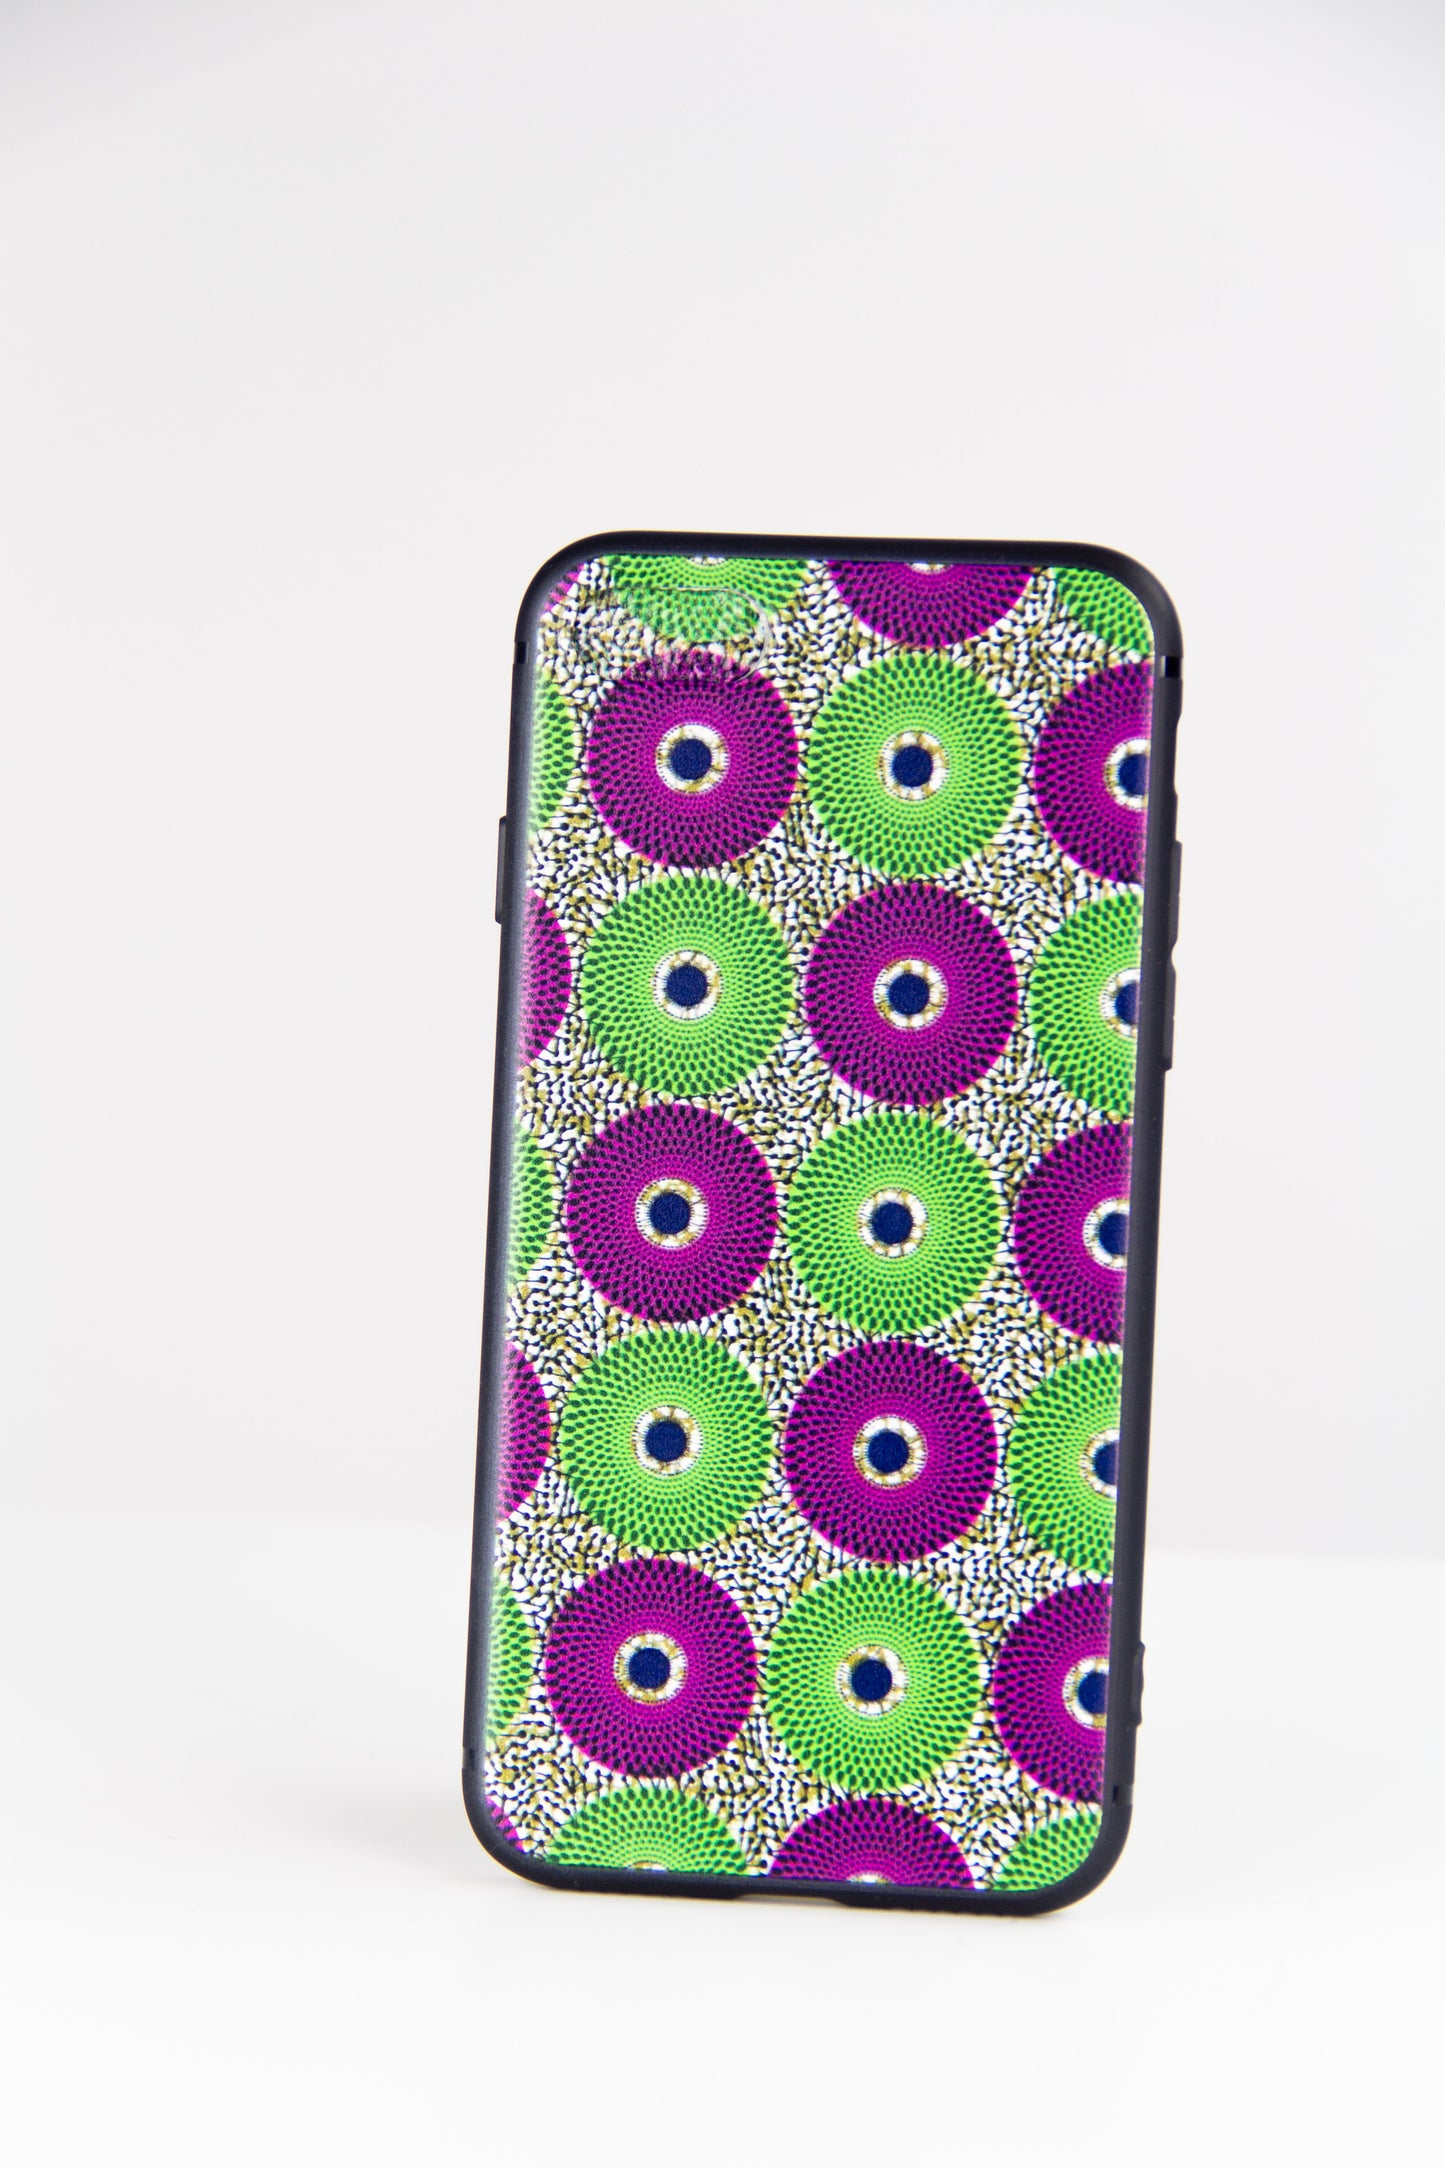 Green and purple iphone case for 6/6s/7/8